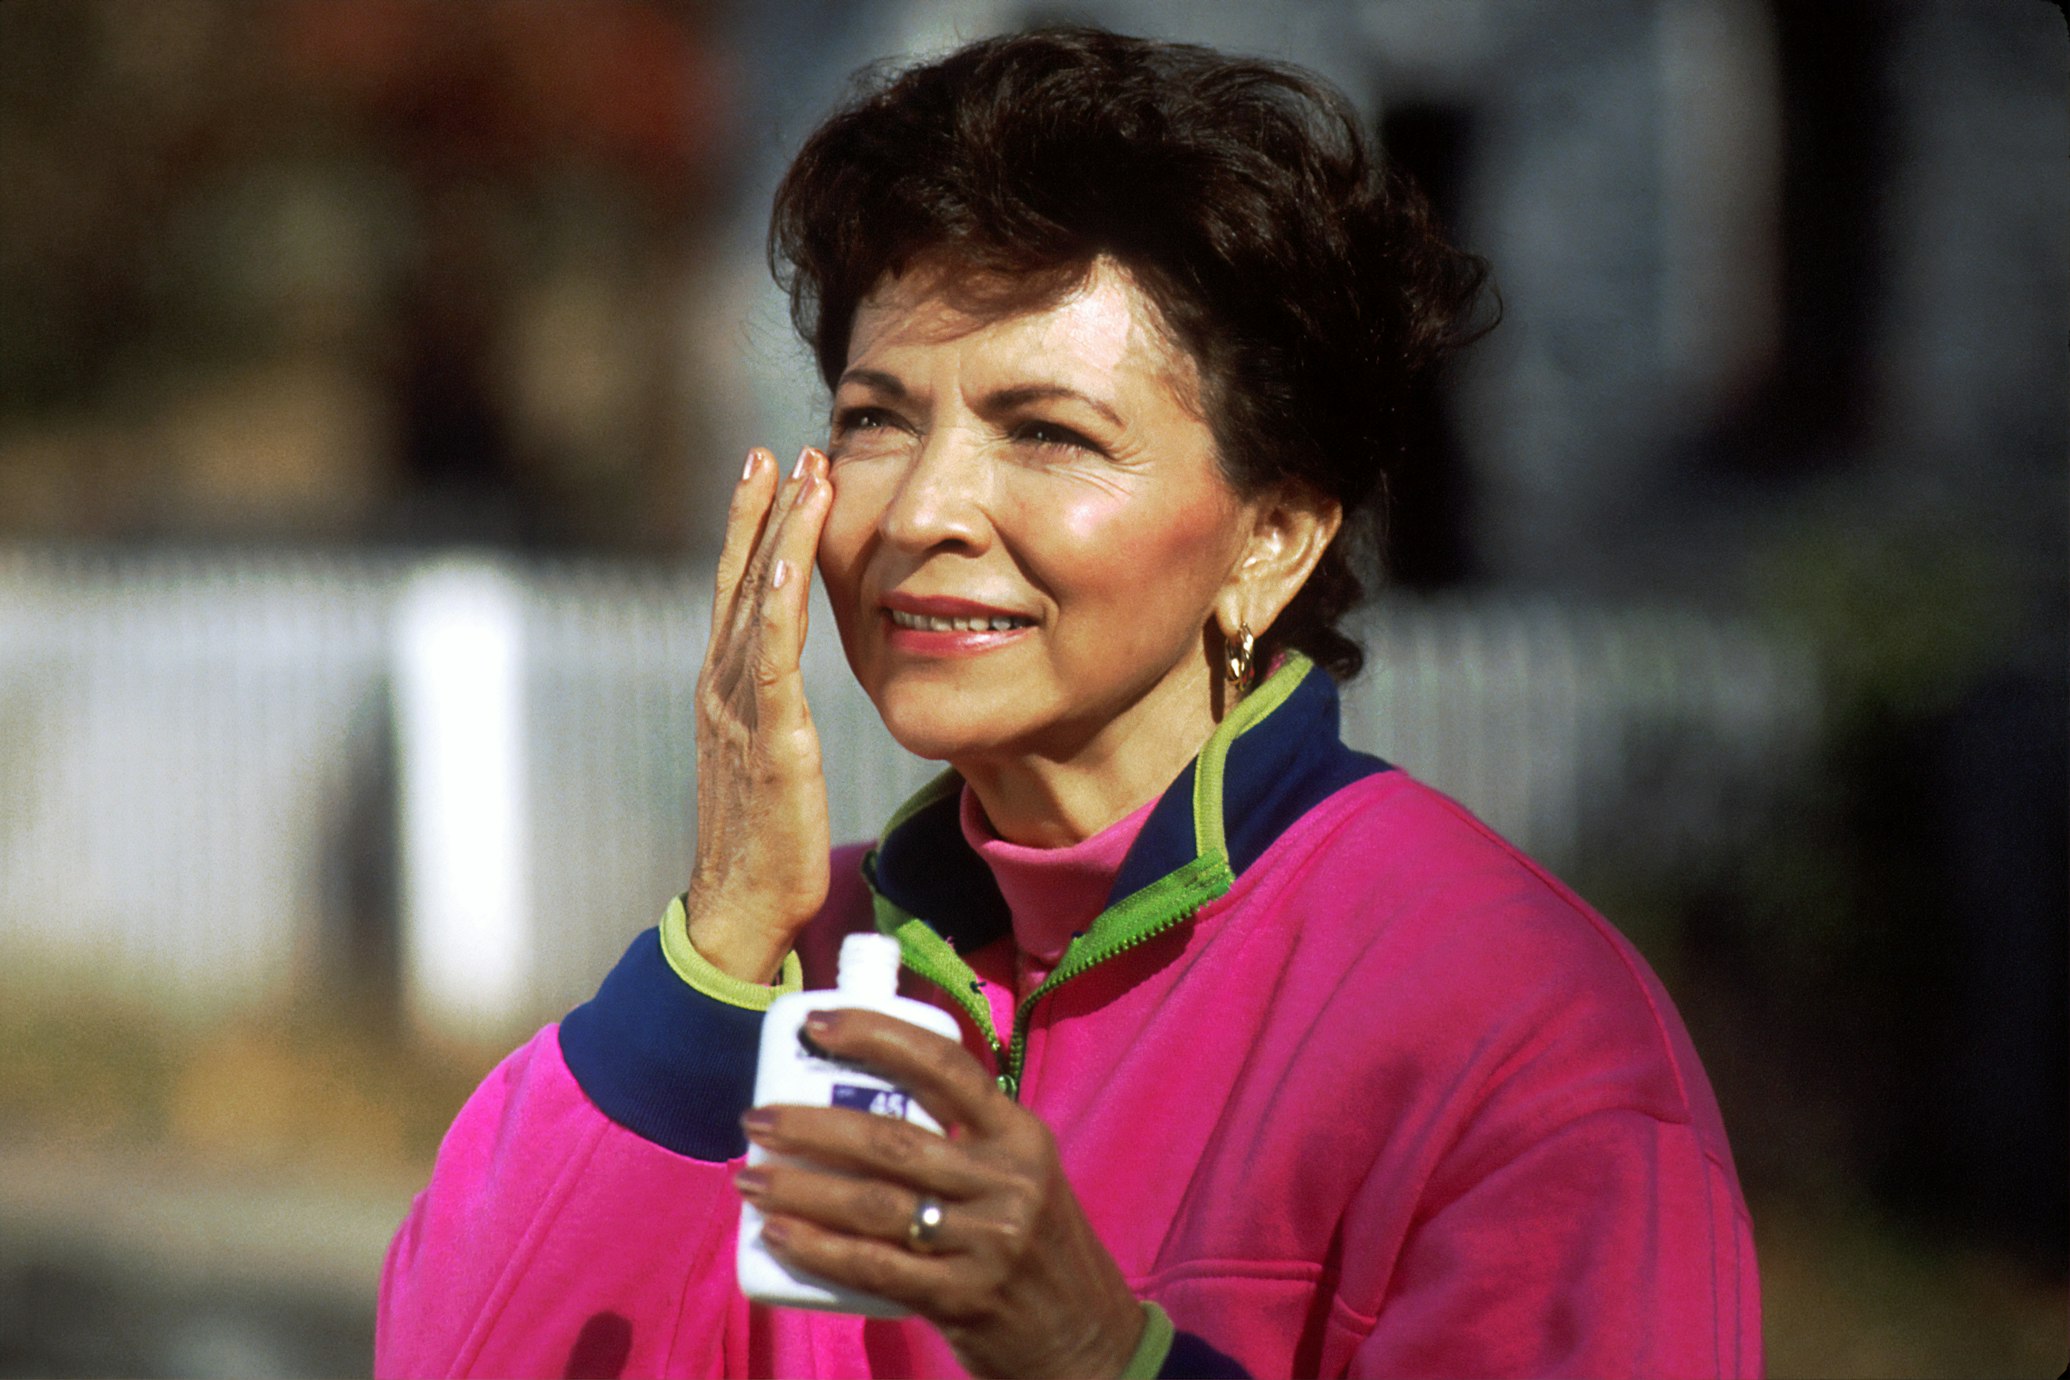 A person applying sunscreen anti-aging cream on their face.